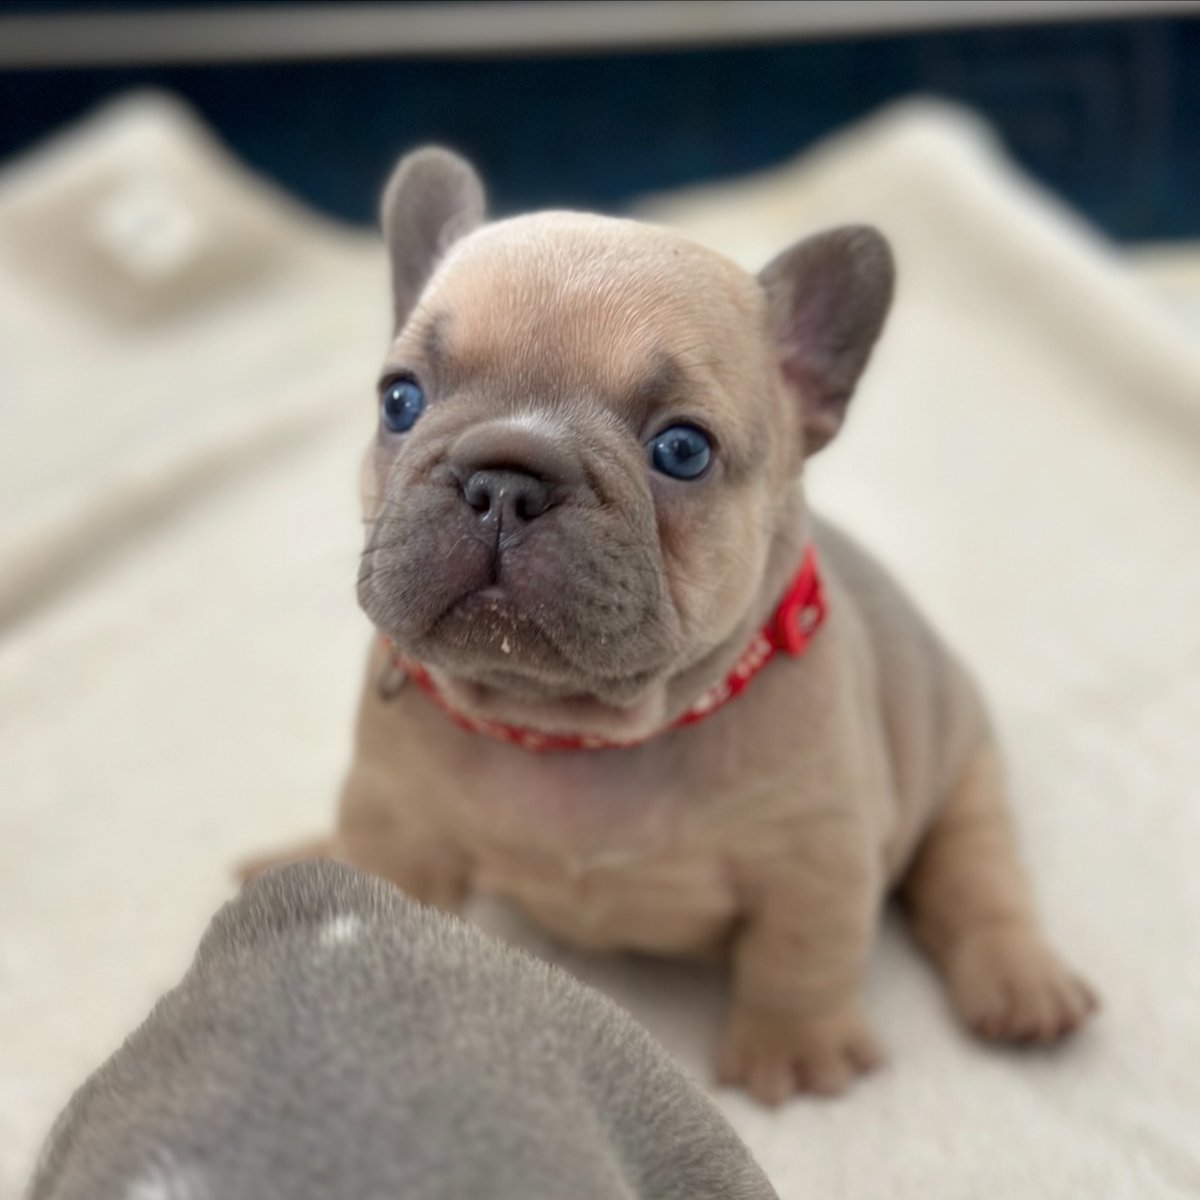 so cute 
#dailyfrenchie #instapuppy #frenchiesoftheday #frenchbulldogpups #frenchiegram #frenchbulldogstyle #frenchiemagazine #frenchbulldogx #frenchiephotos #frenchiestyle